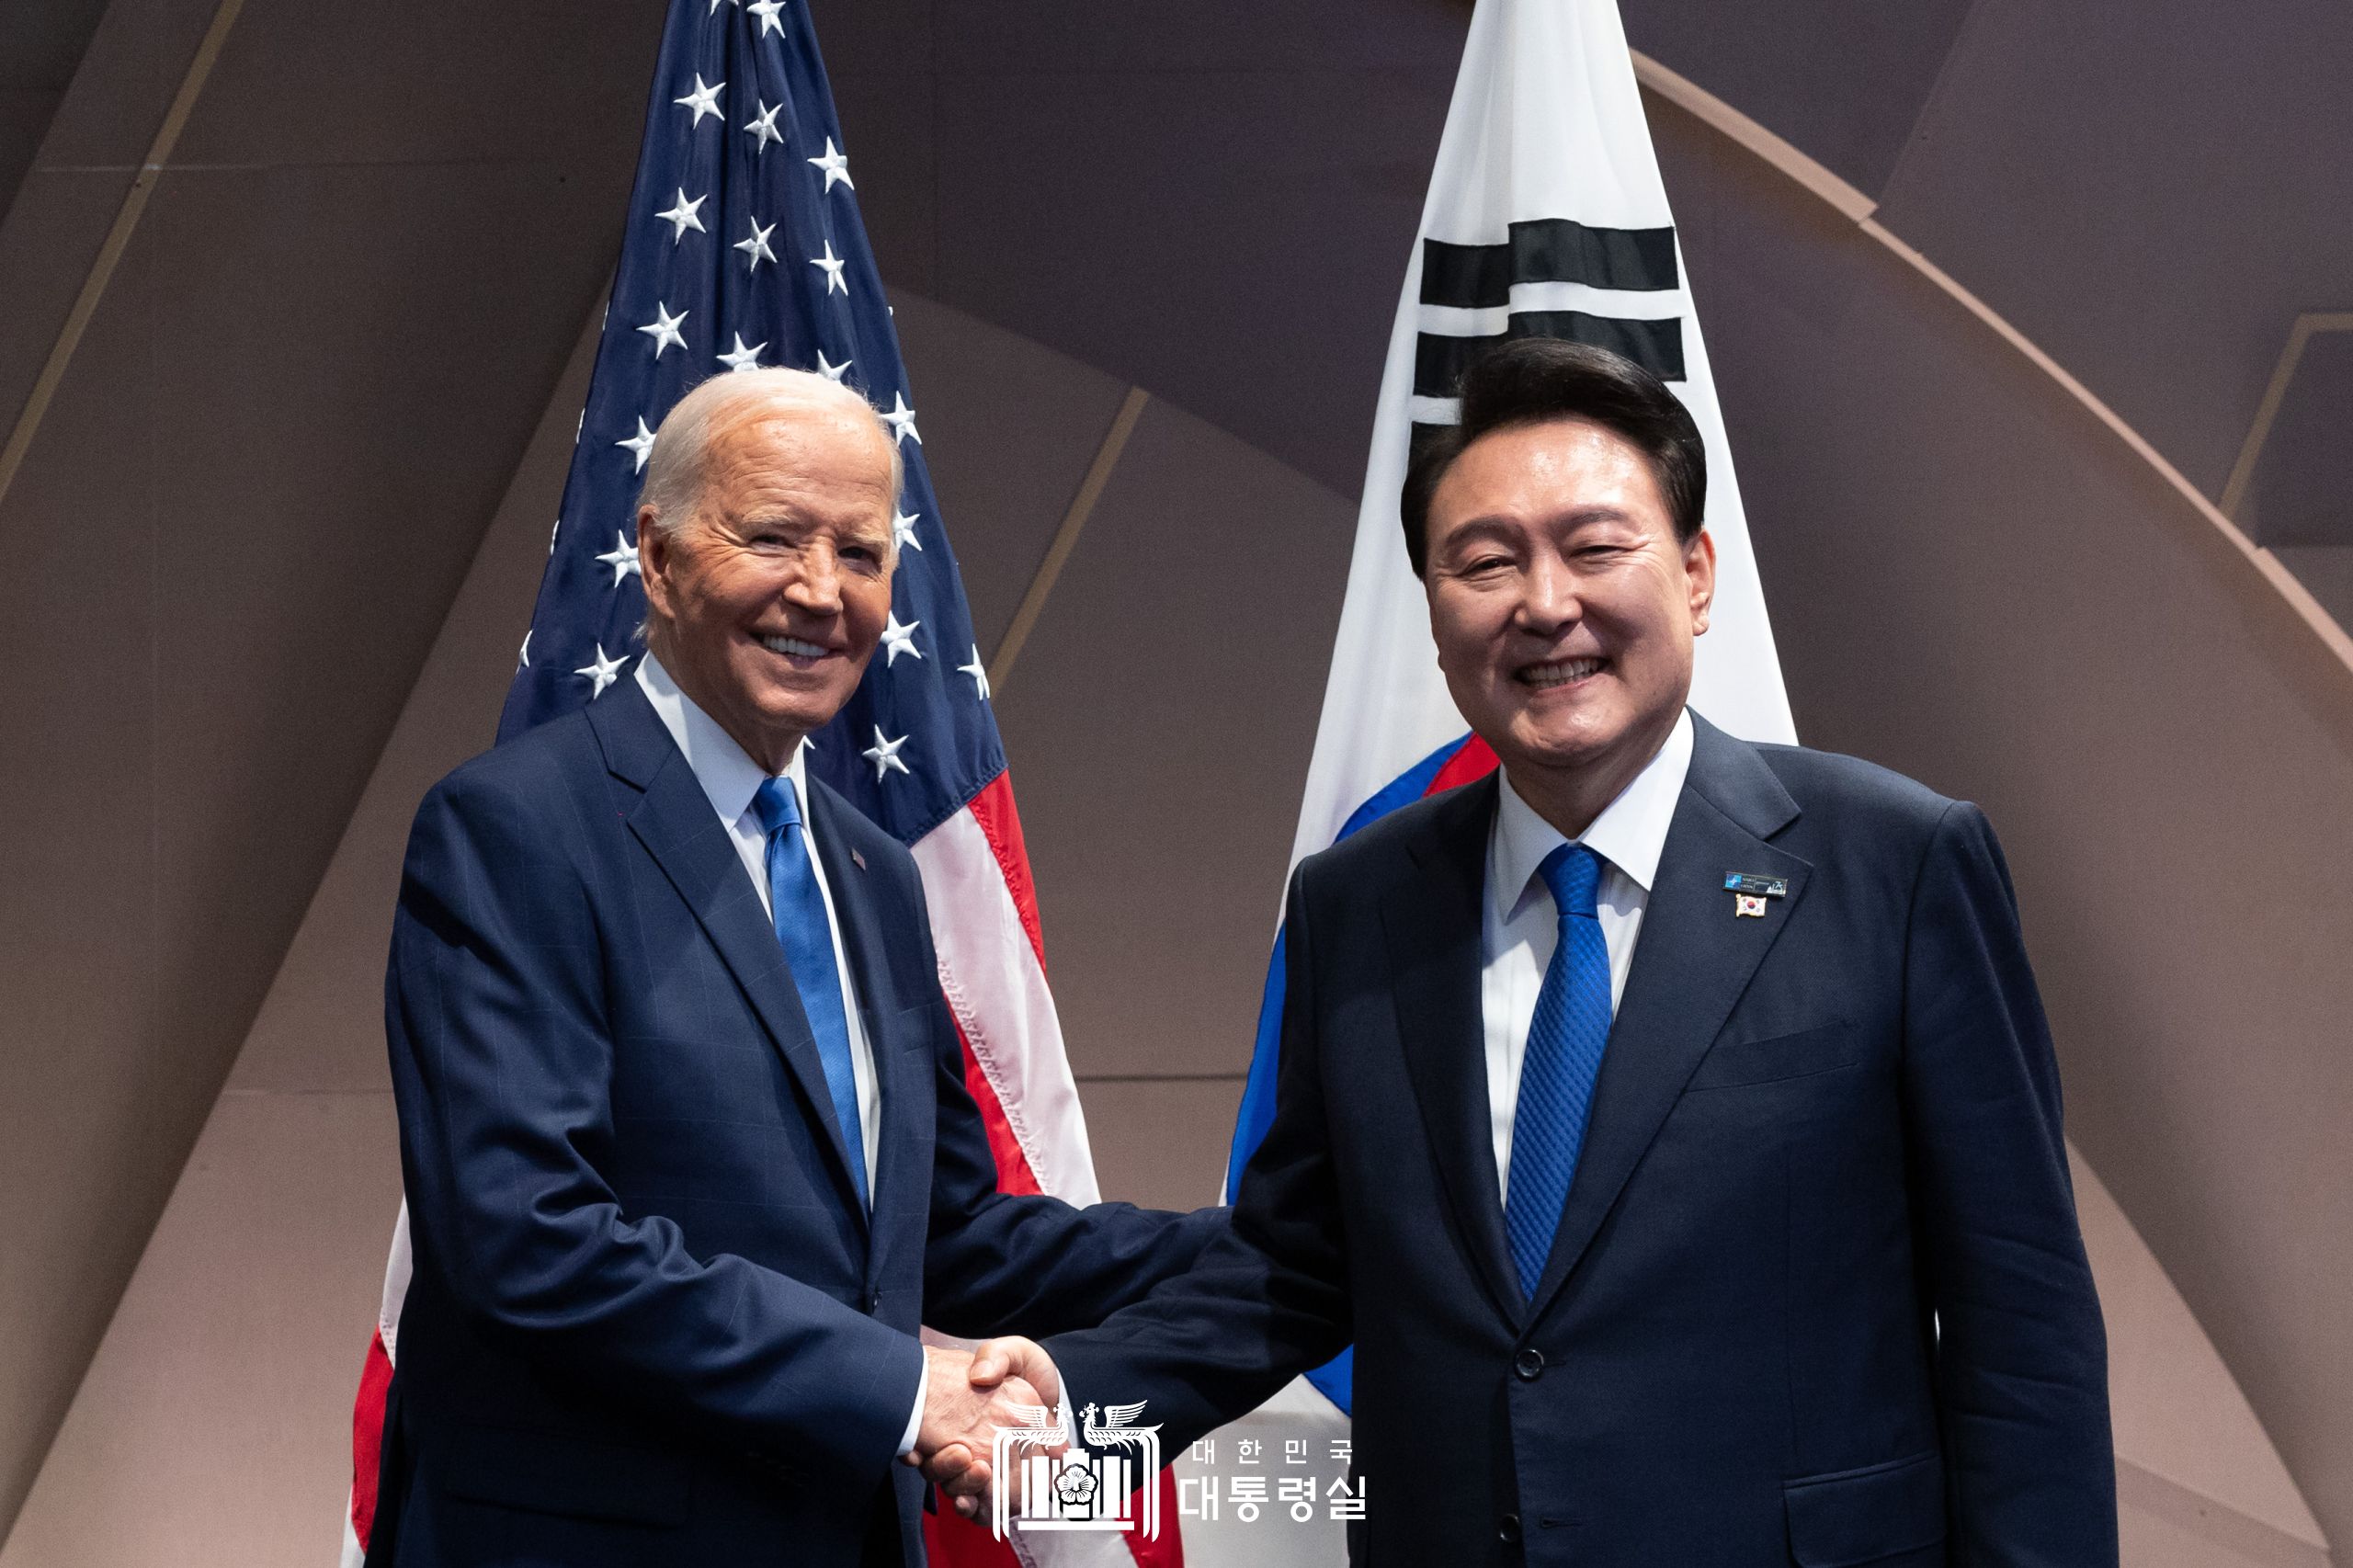 Joint Statement by President Joseph R. Biden of the United States of America and President Yoon Suk Yeol of the Republic of Korea on U.S.-ROK Guidelines for Nuclear Deterrence and Nuclear Operations on the Korean Peninsula